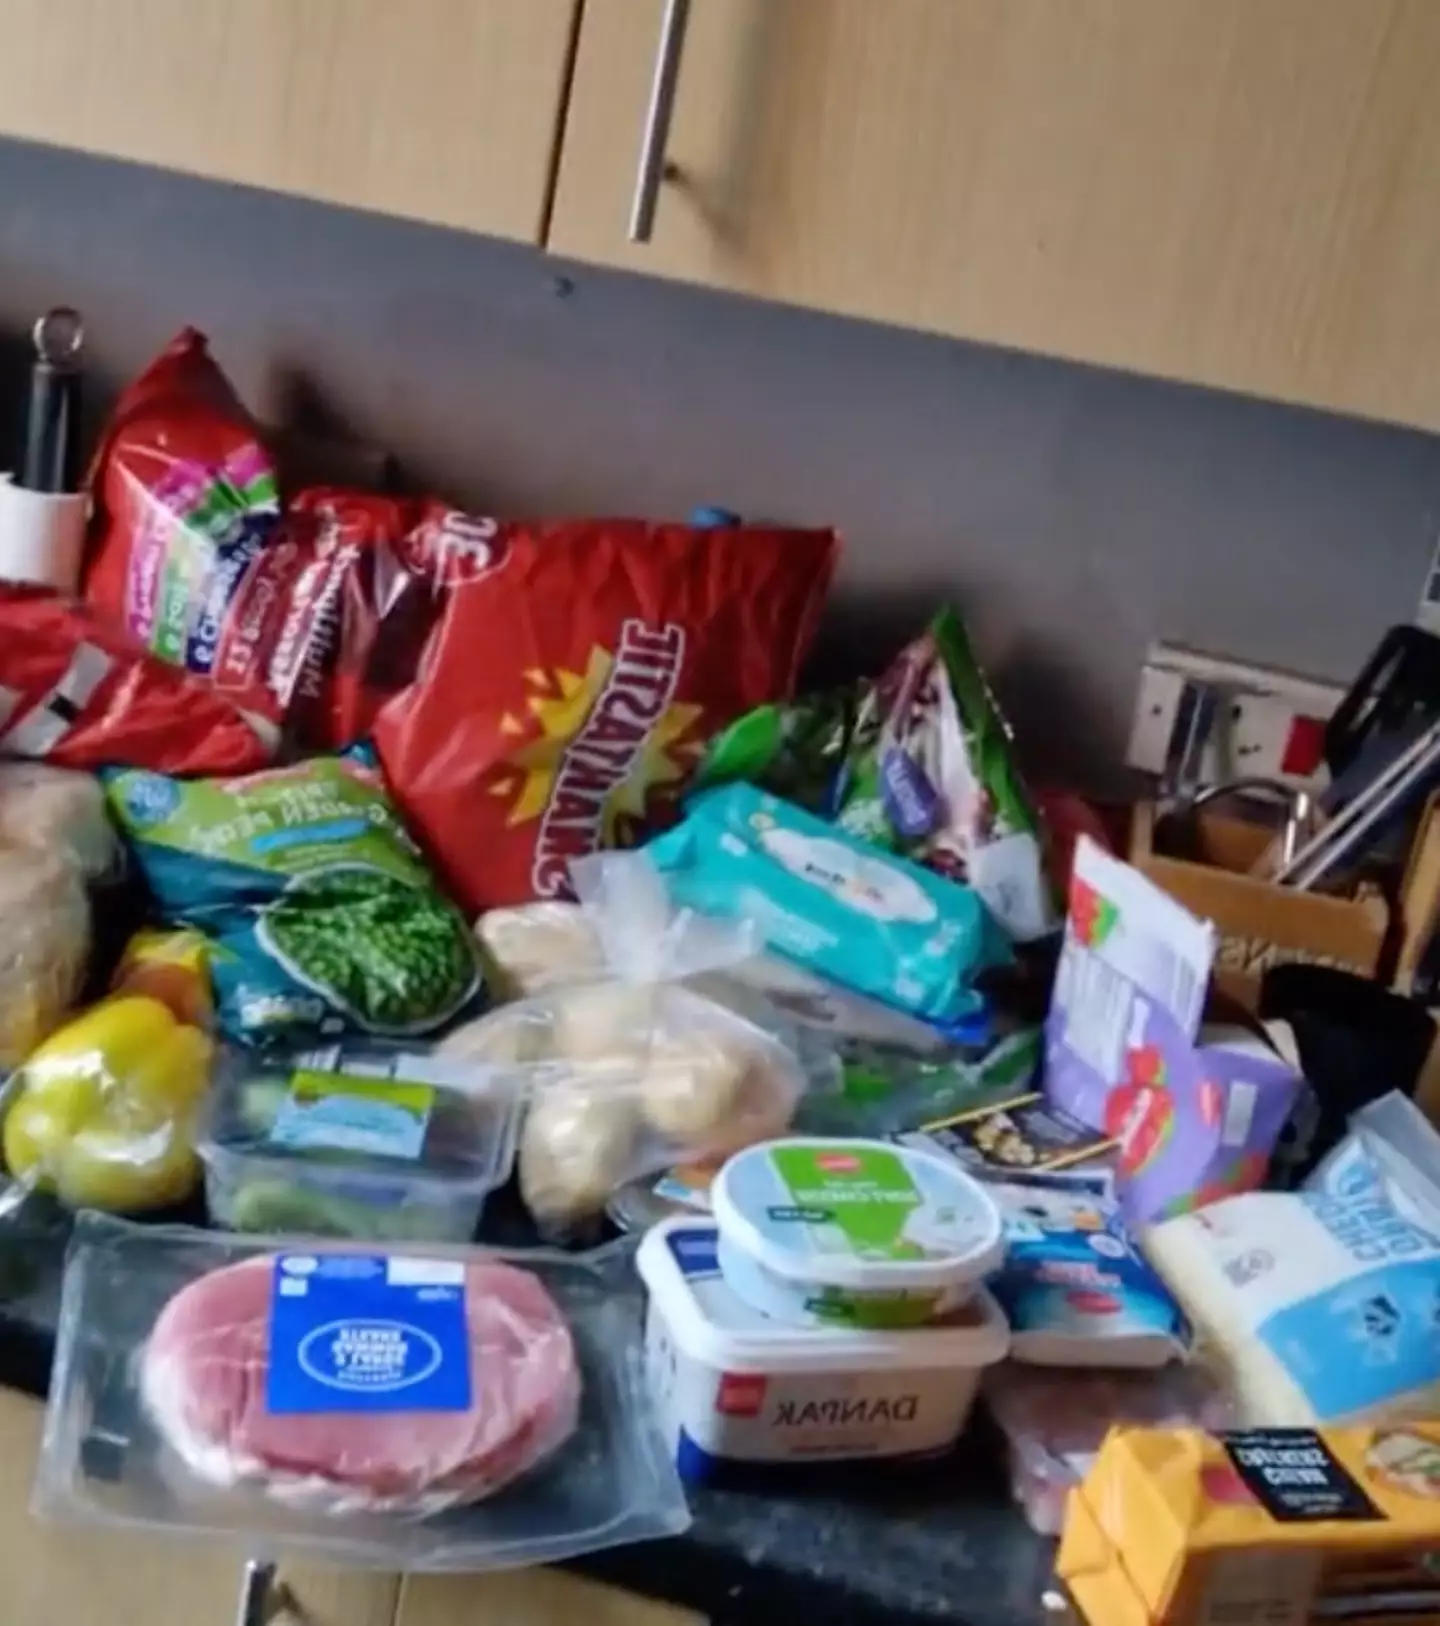 The food for a family of four for a week came to just over £40.